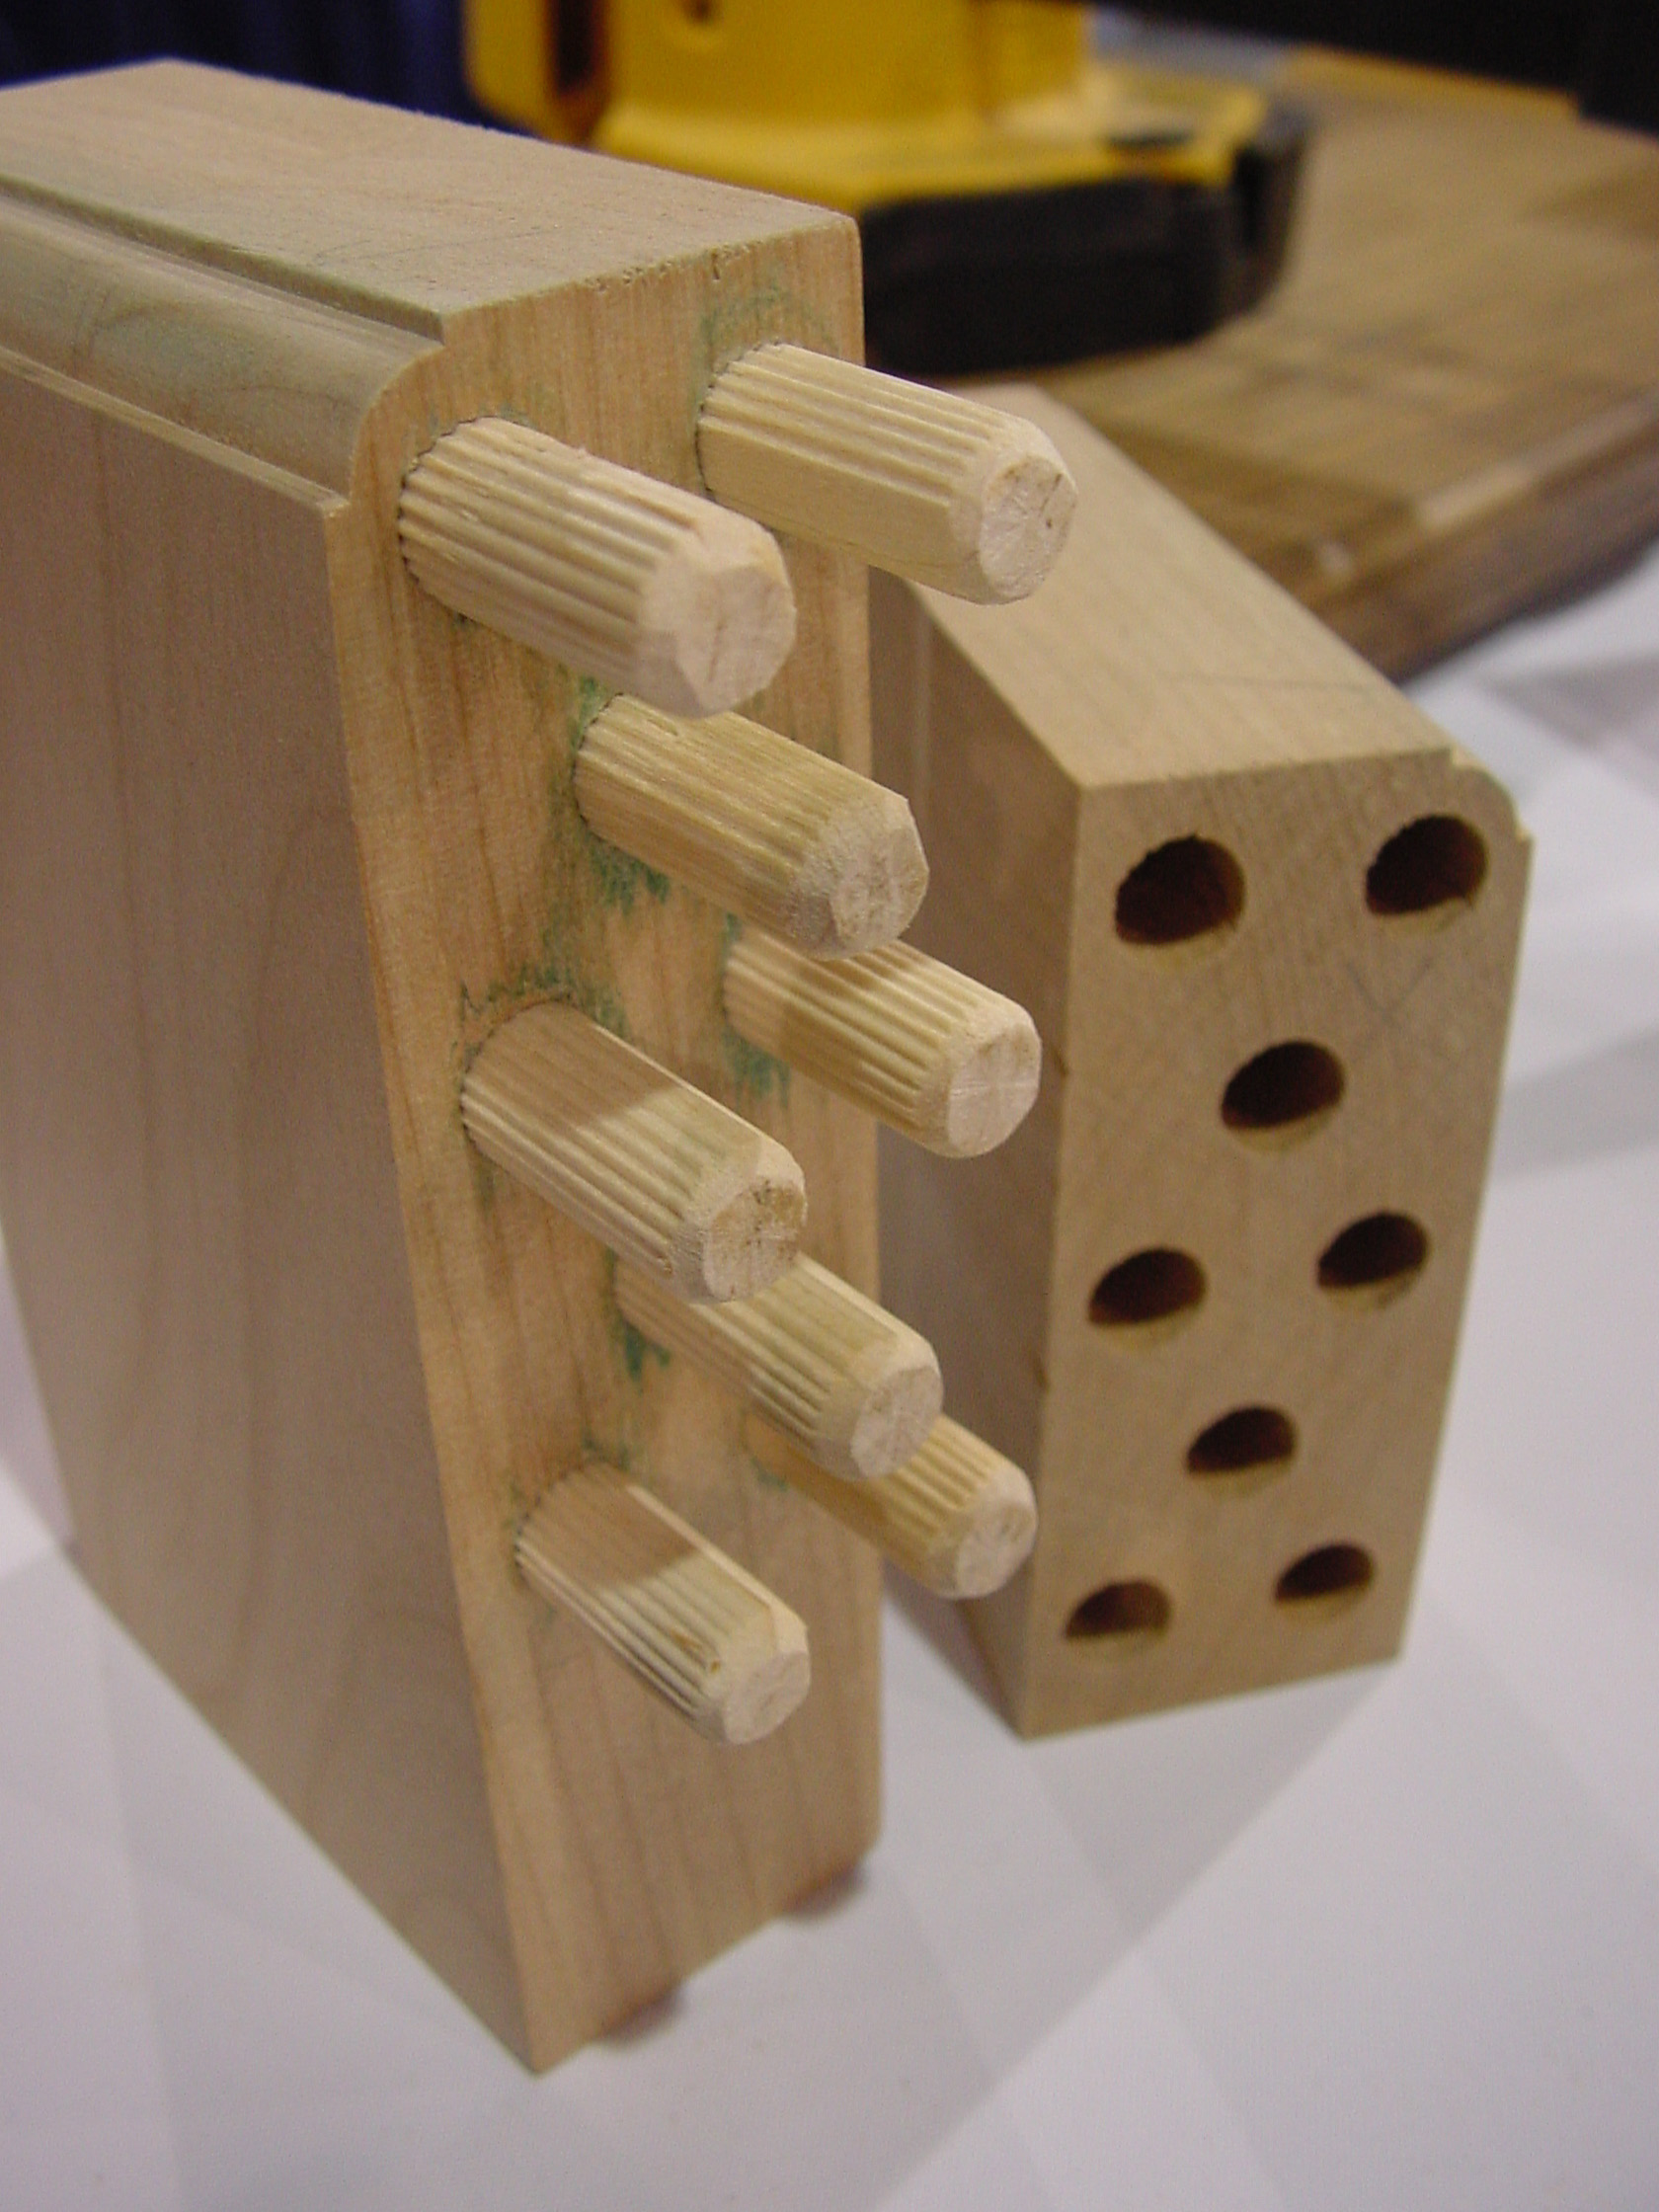 Joints on woodworking